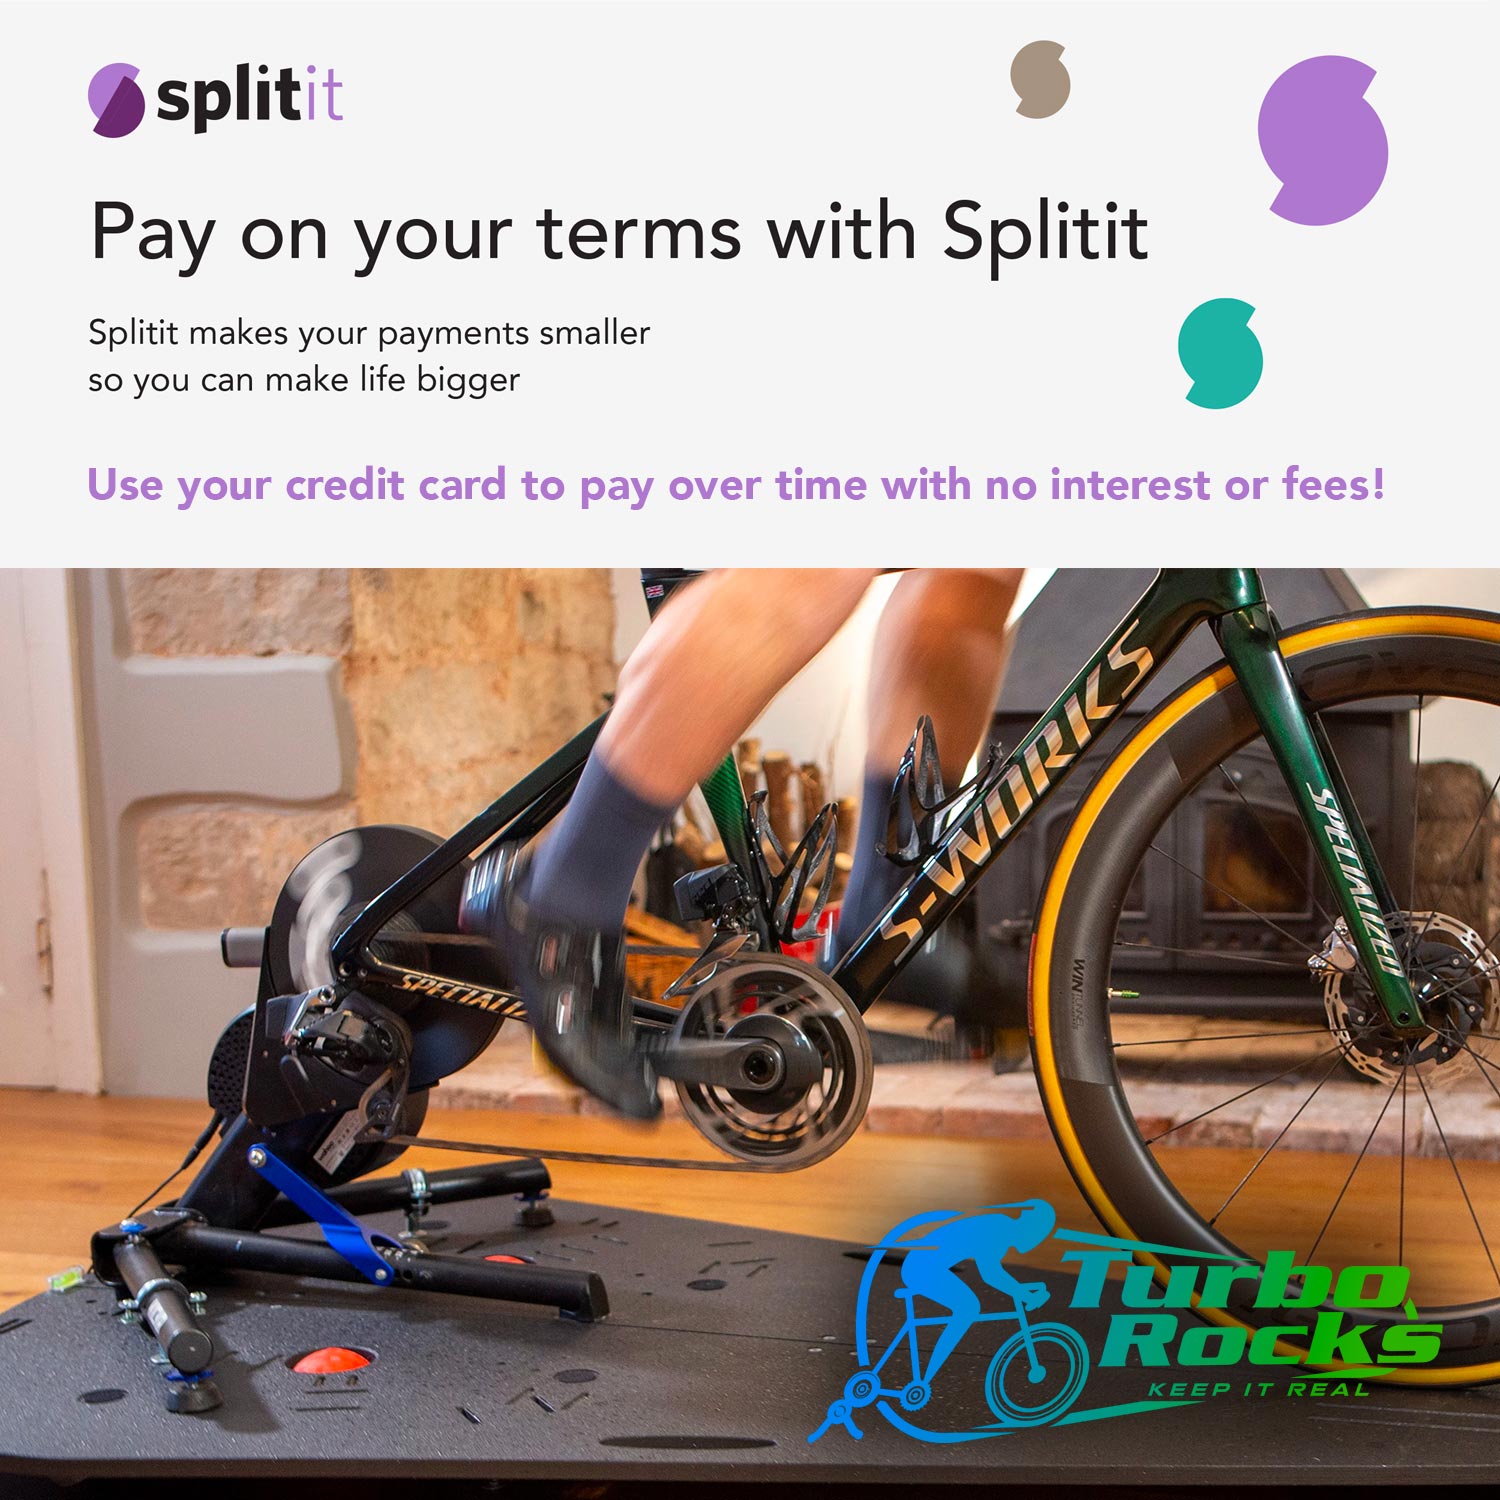 Pay monthly with Splitit